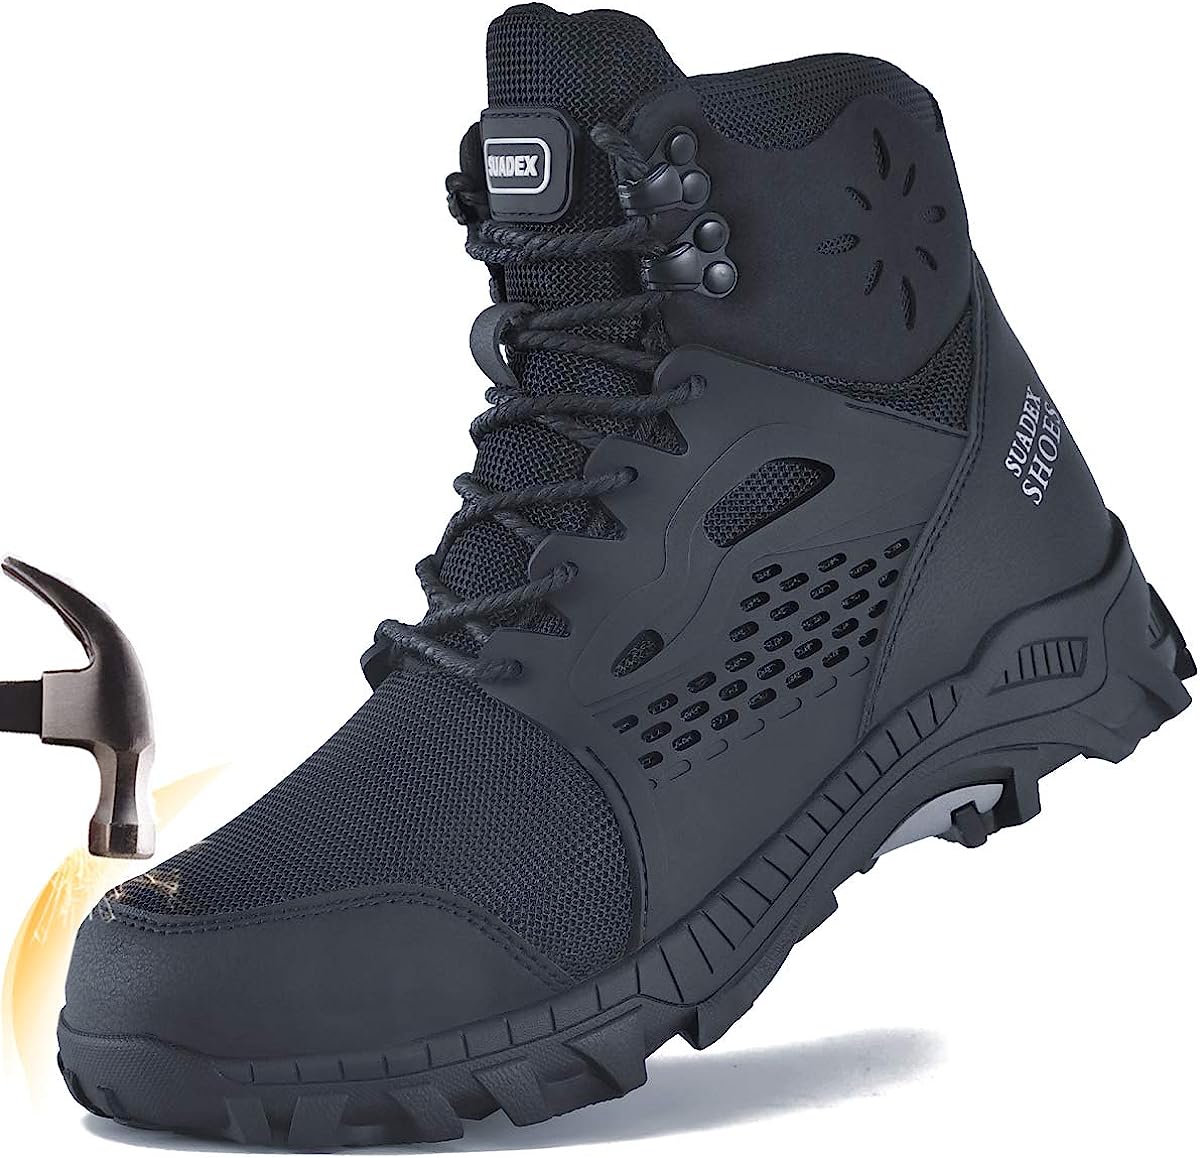 SUADEX Steel Toe Boots for Men Work Construction Boots [...]